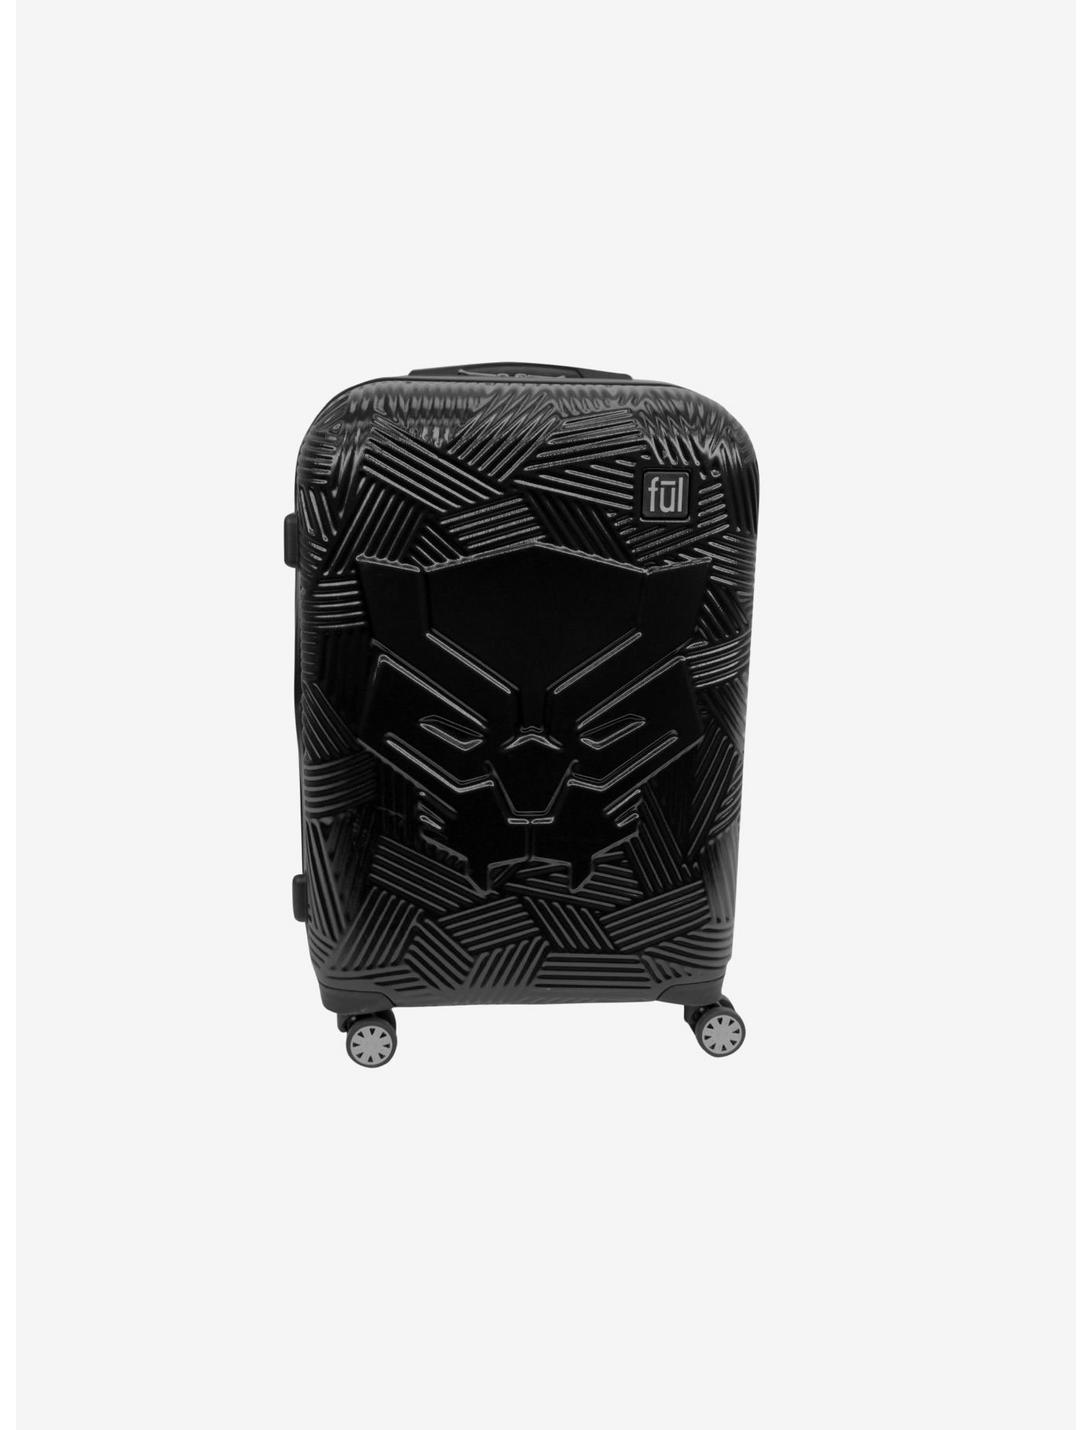 FUL Marvel Black Panther Icon Molded Hard Sided 21 Inch Rolling Luggage, , hi-res